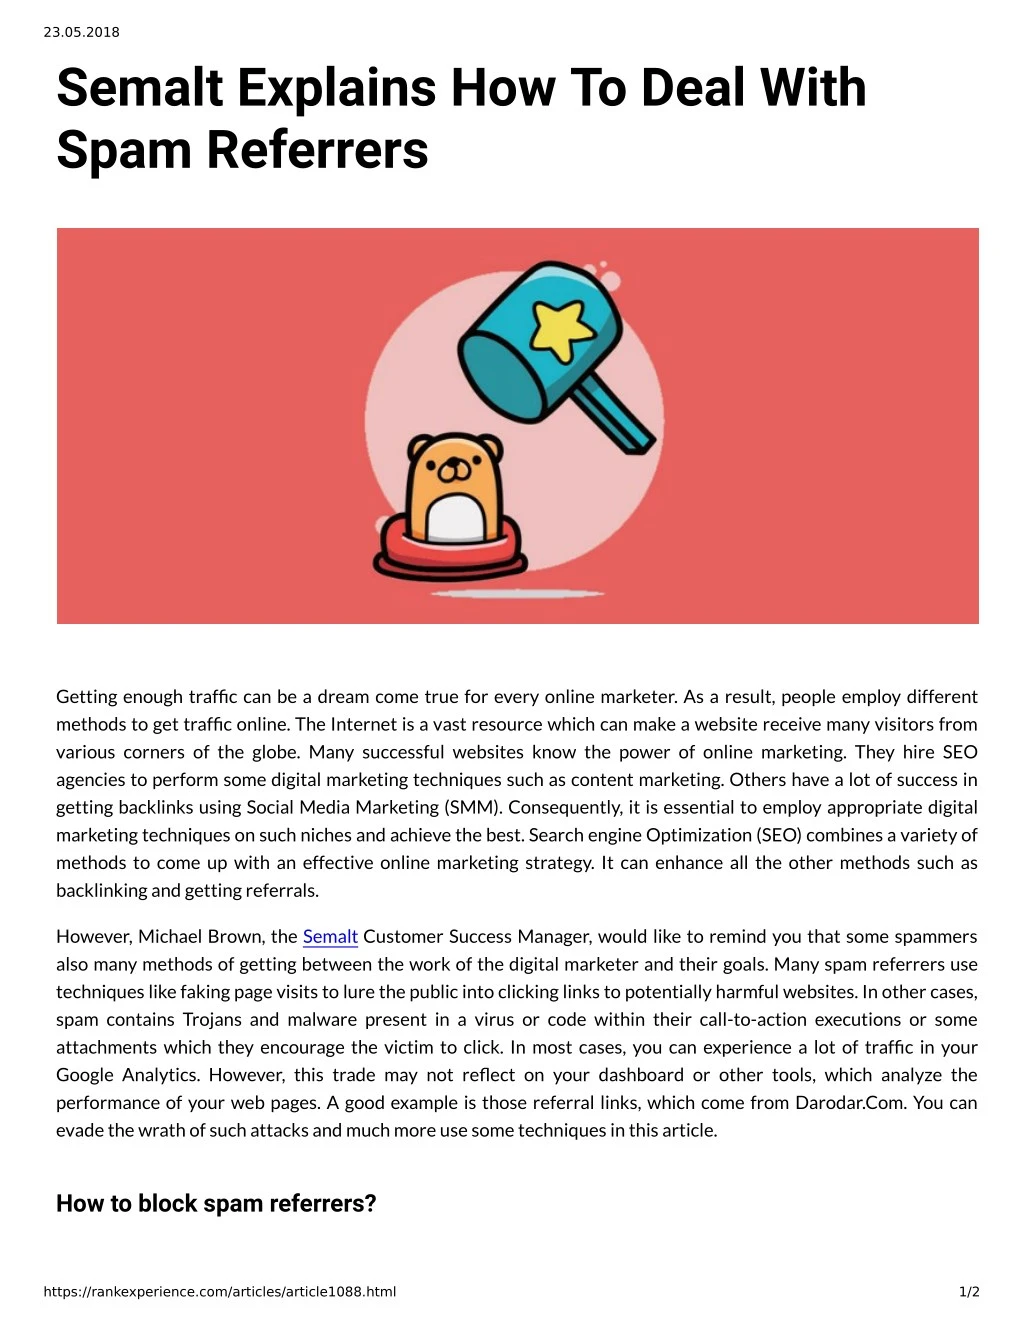 Spam Referrers